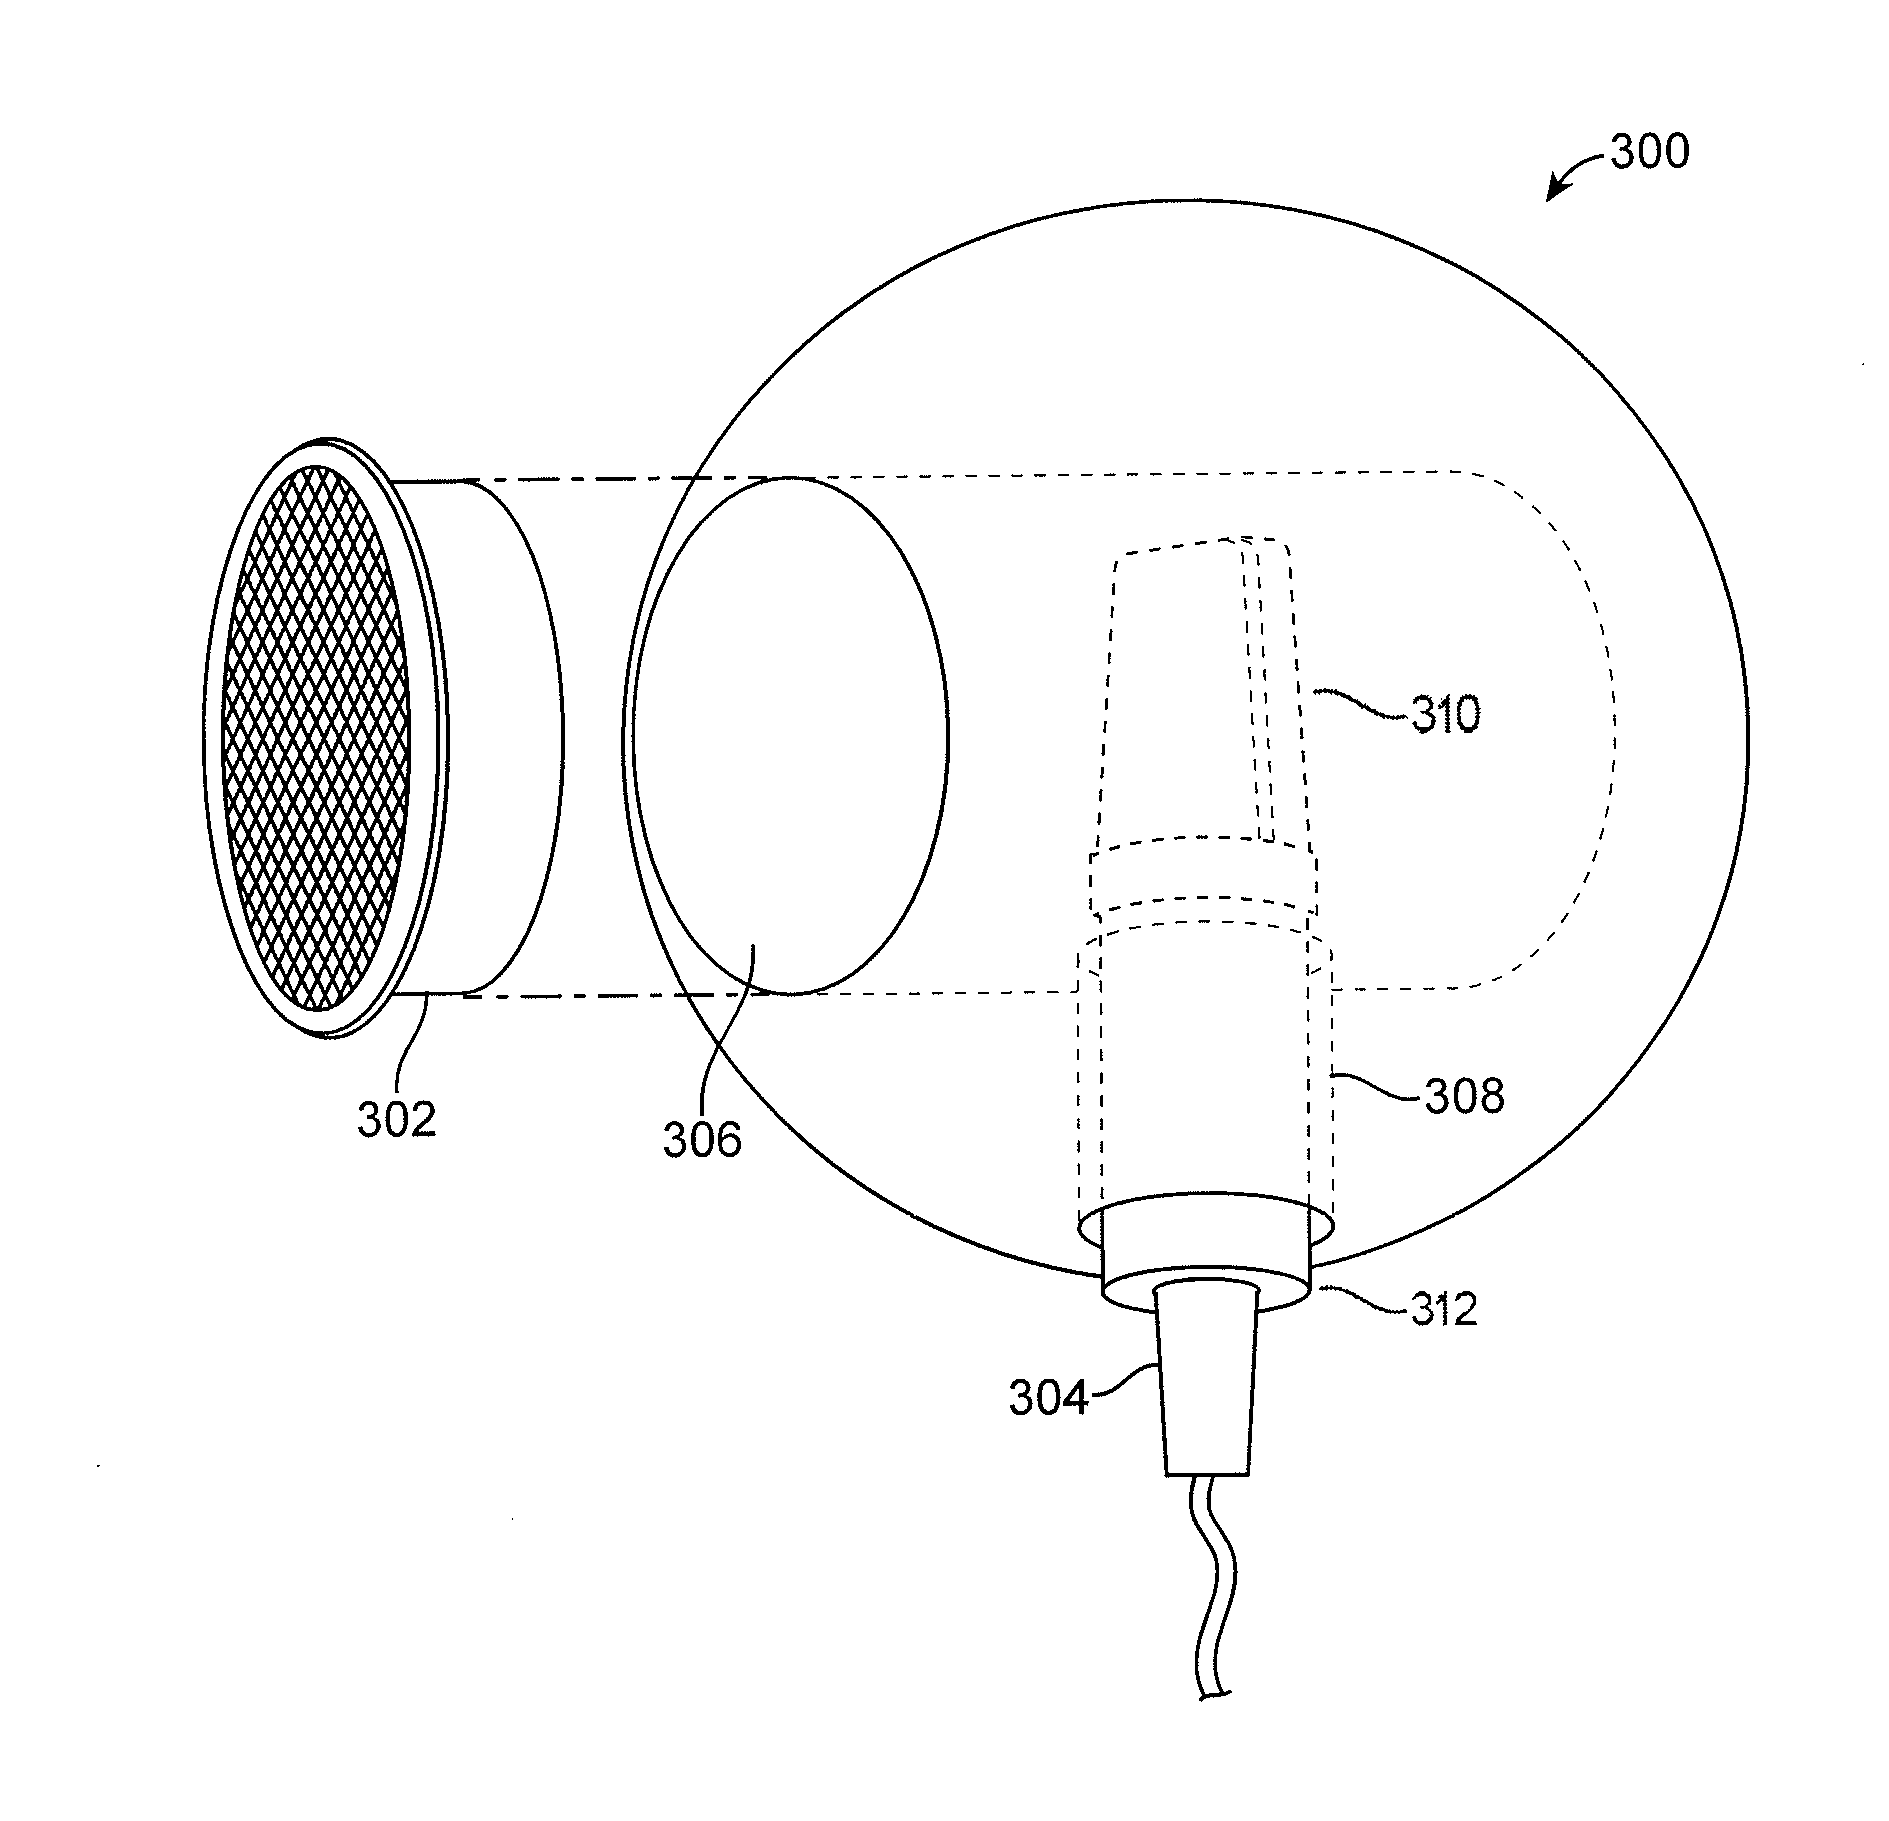 Noise mitigating microphone attachment